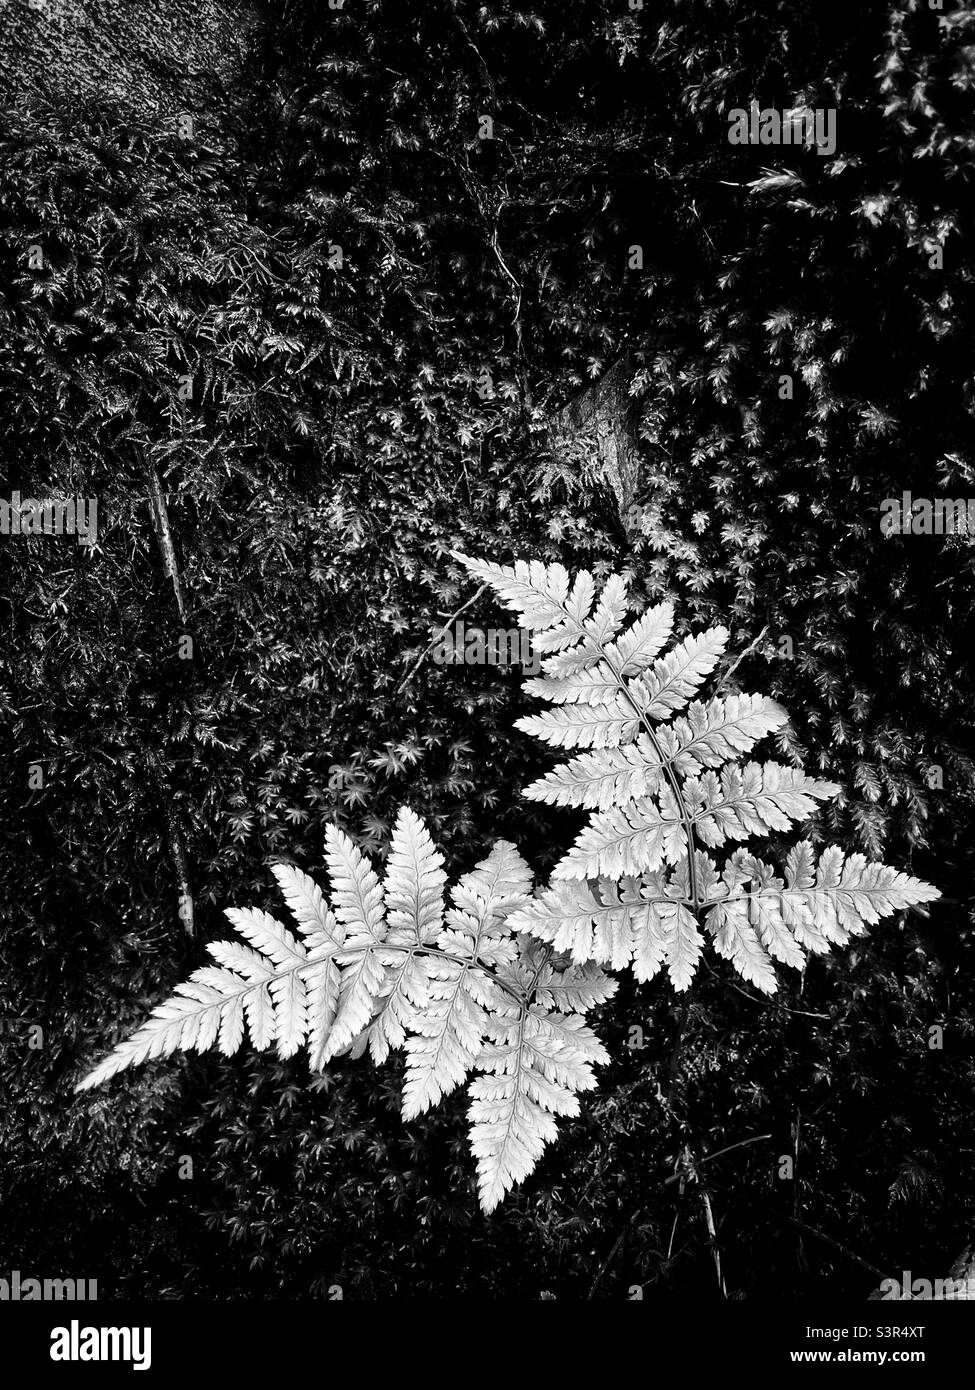 Two ferns growing in a damp mossy area. Black and white. Stock Photo